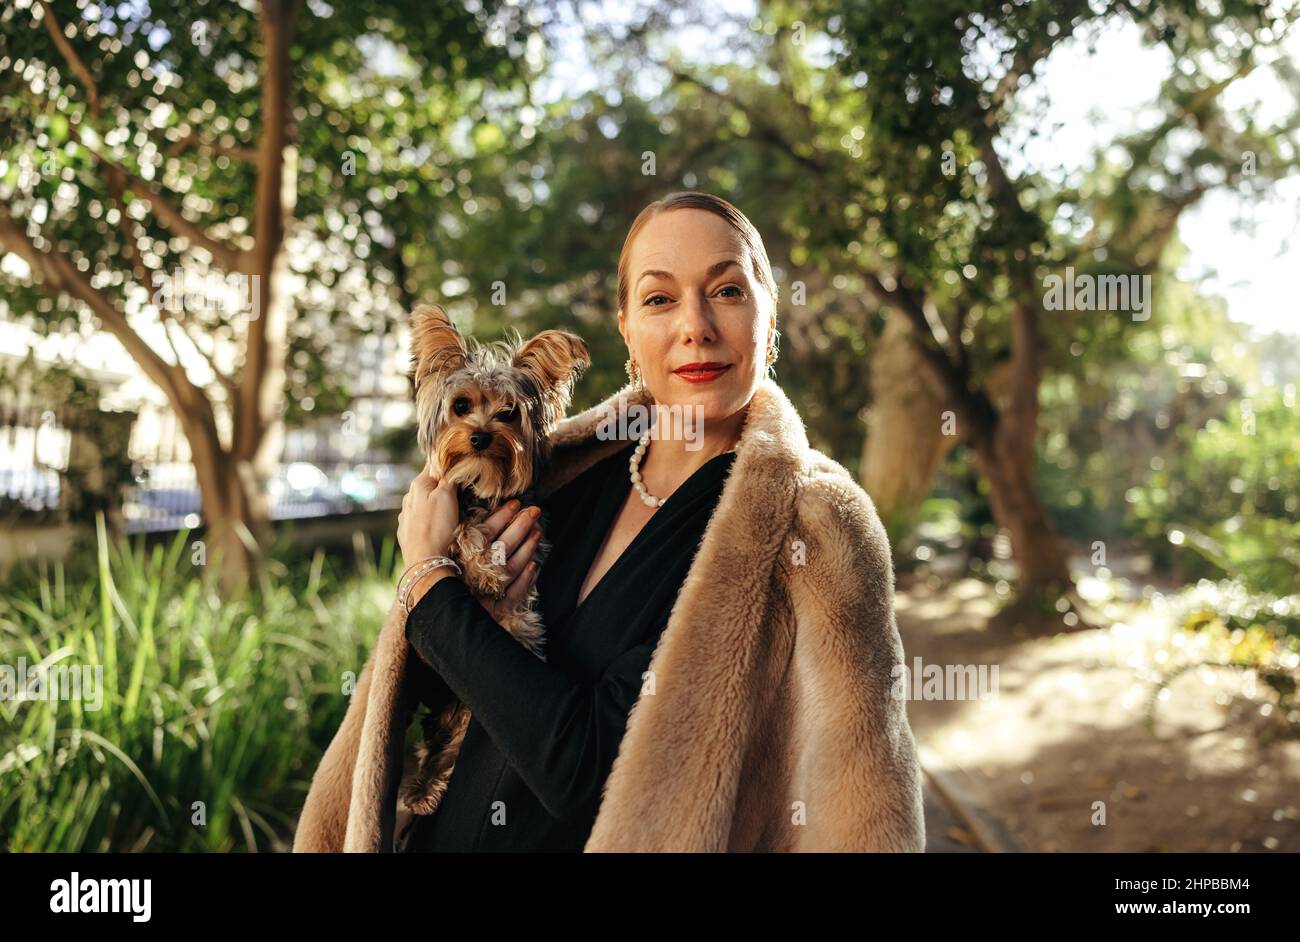 High class woman looking at the camera while holding her puppy outdoors. Middle aged posh woman standing alone in a park during the day. Female pet ow Stock Photo